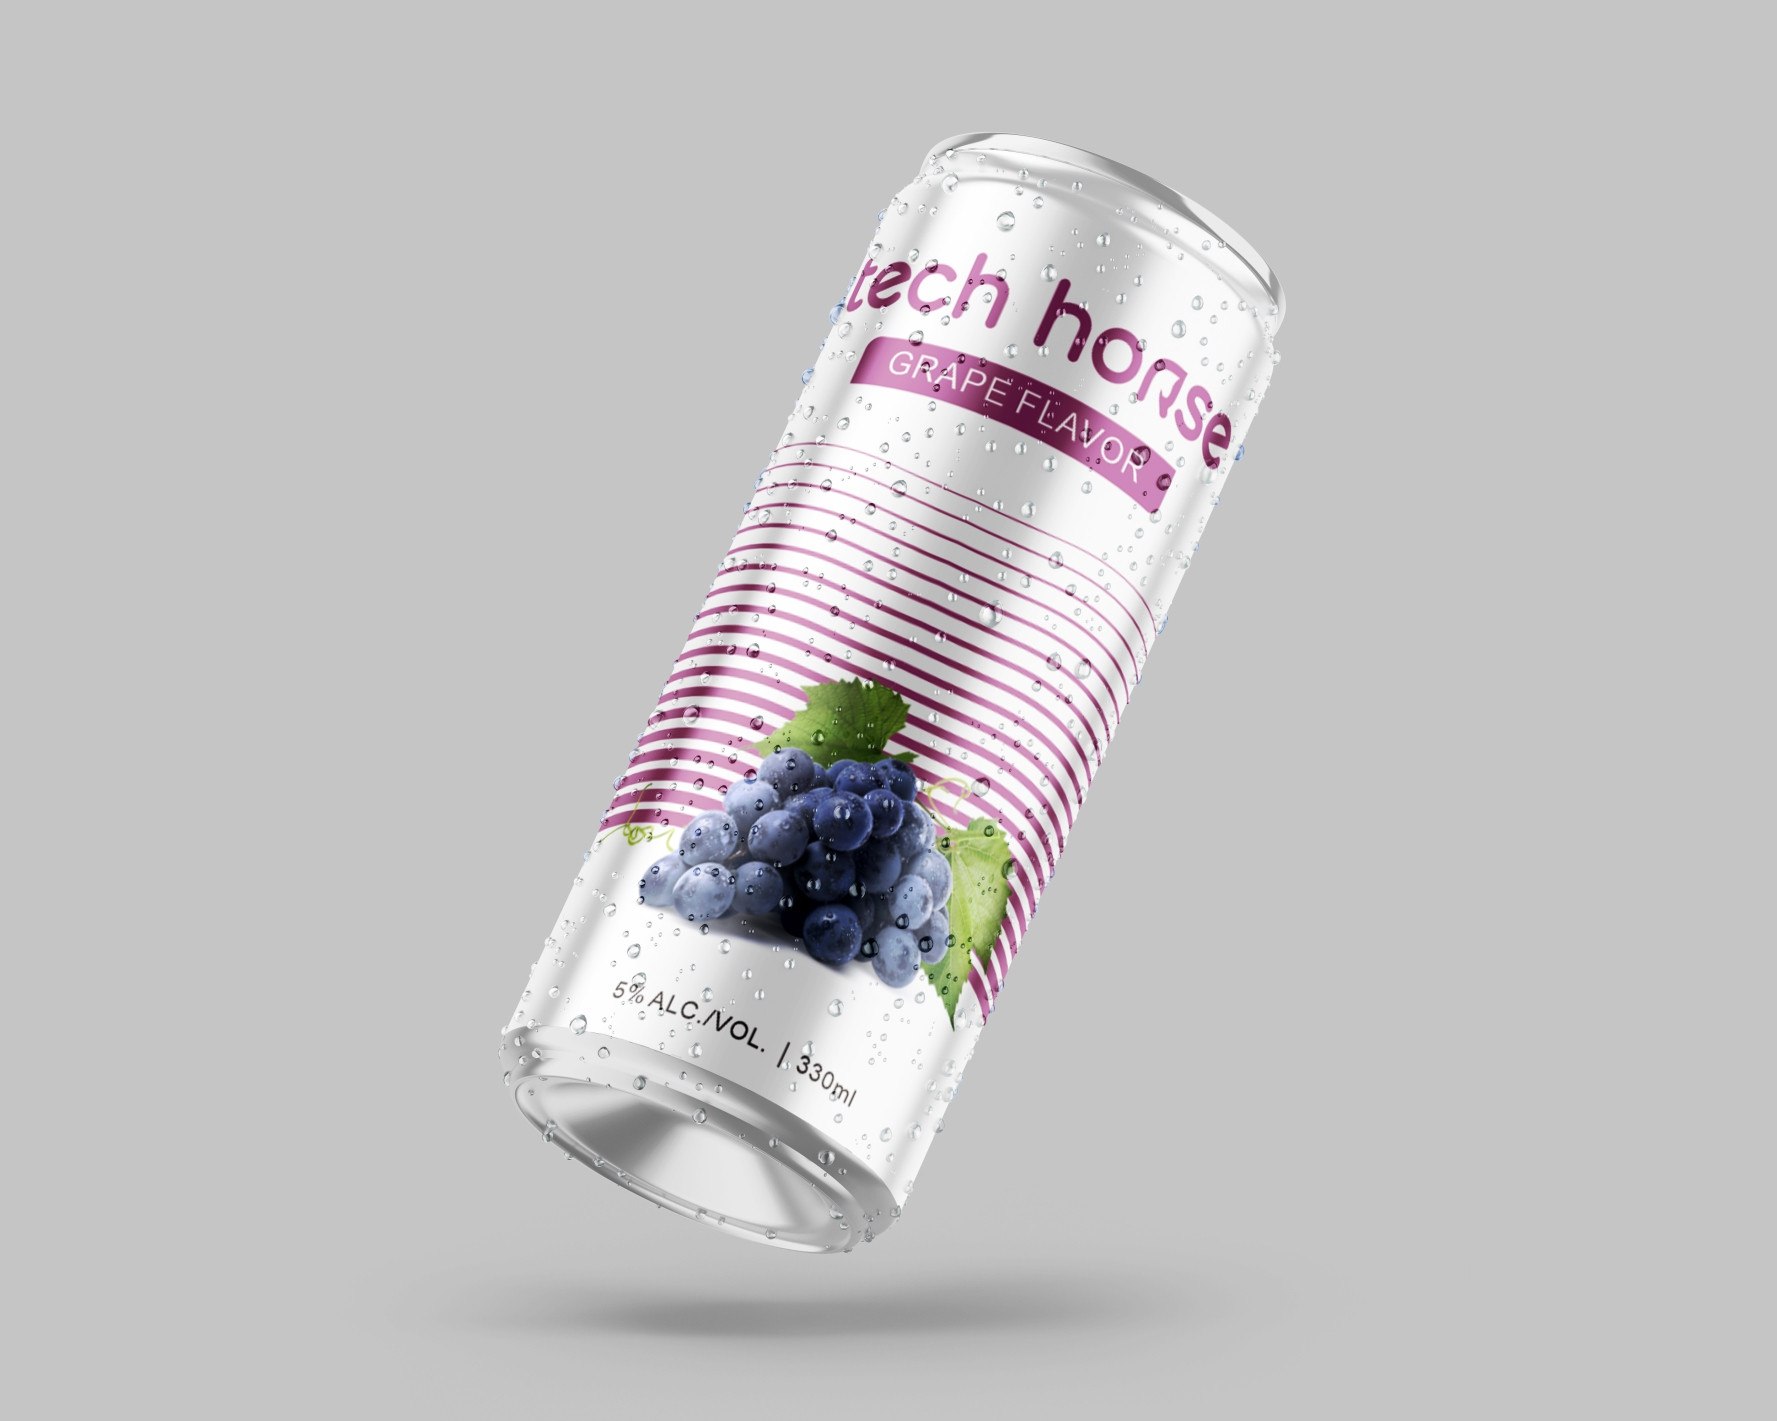 China 500ml Grape Flavor OEM ODM  Private Label Drink Canned Cocktails Low Sugar 5% AlC/VOL factory